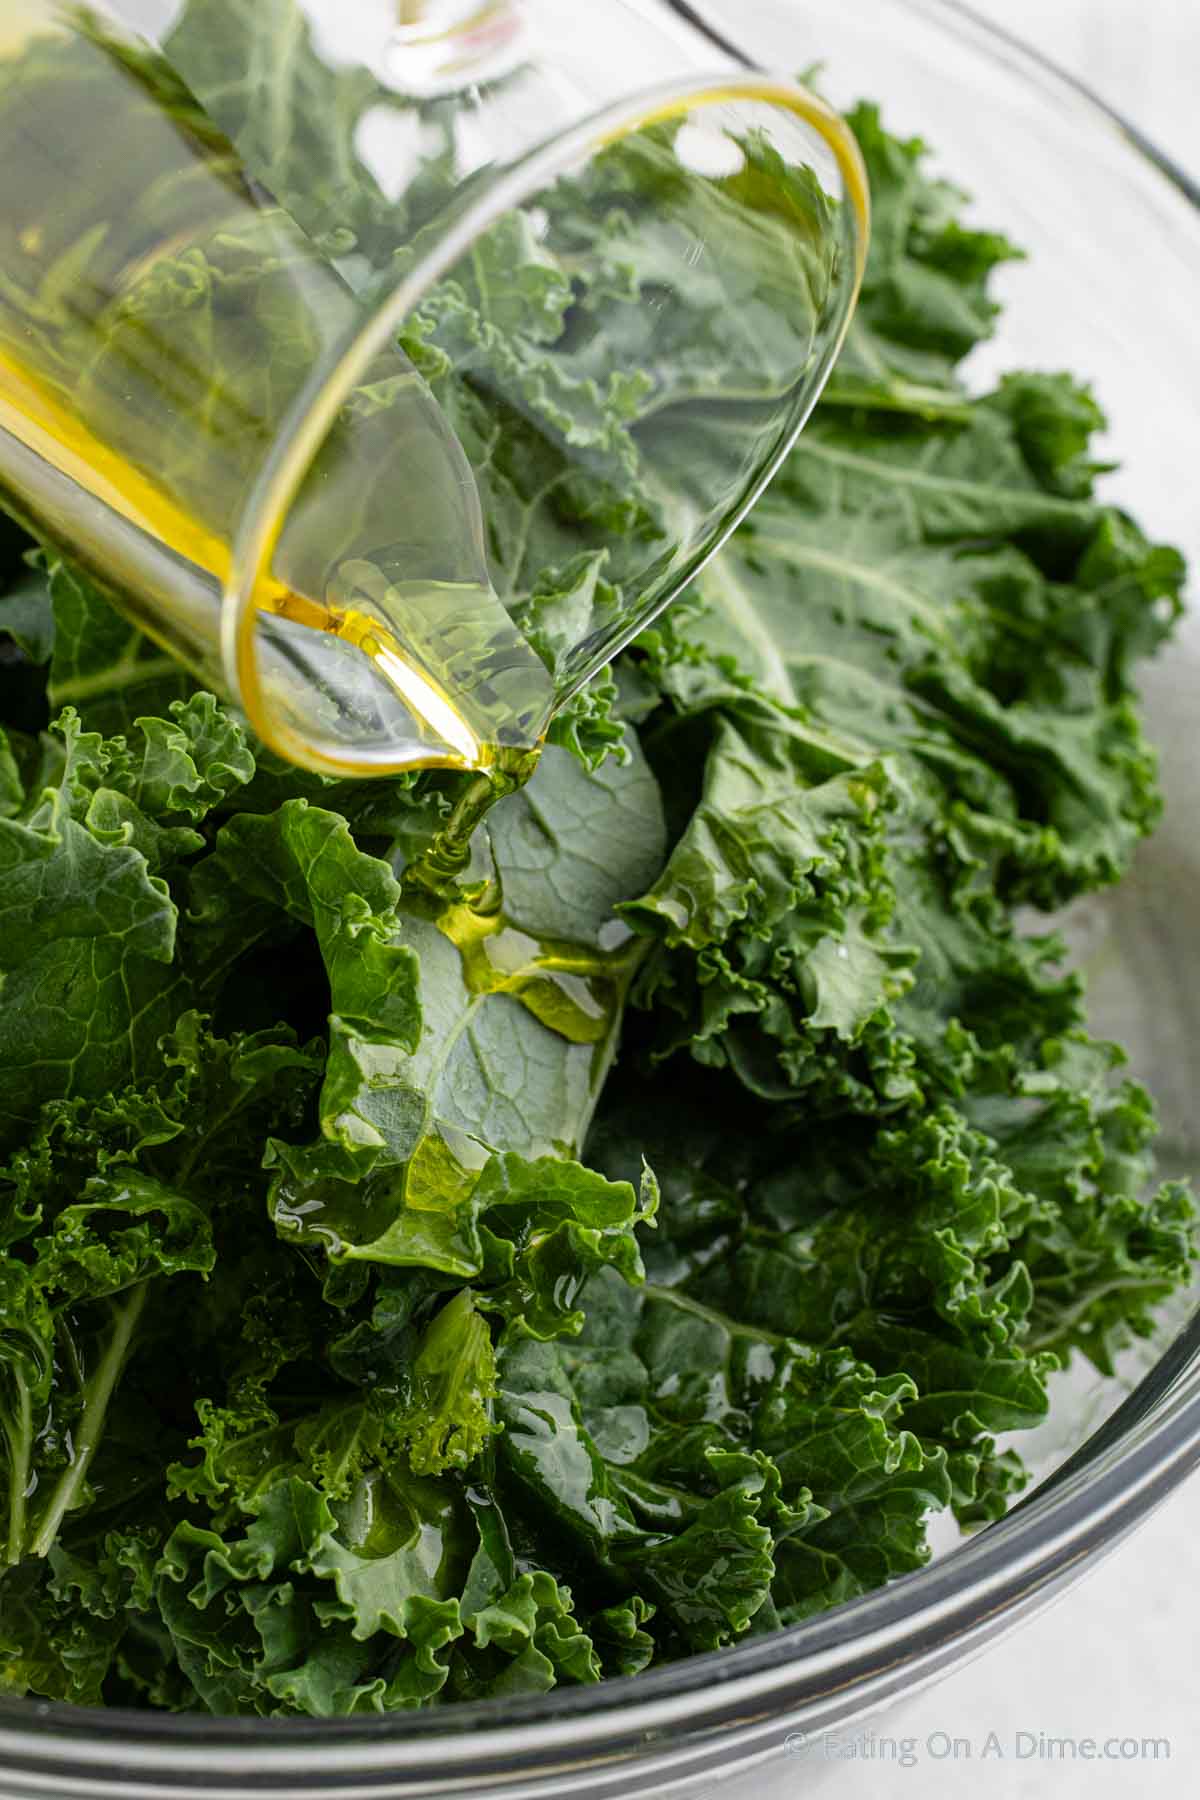 Pouring oil on the kale in a bowl